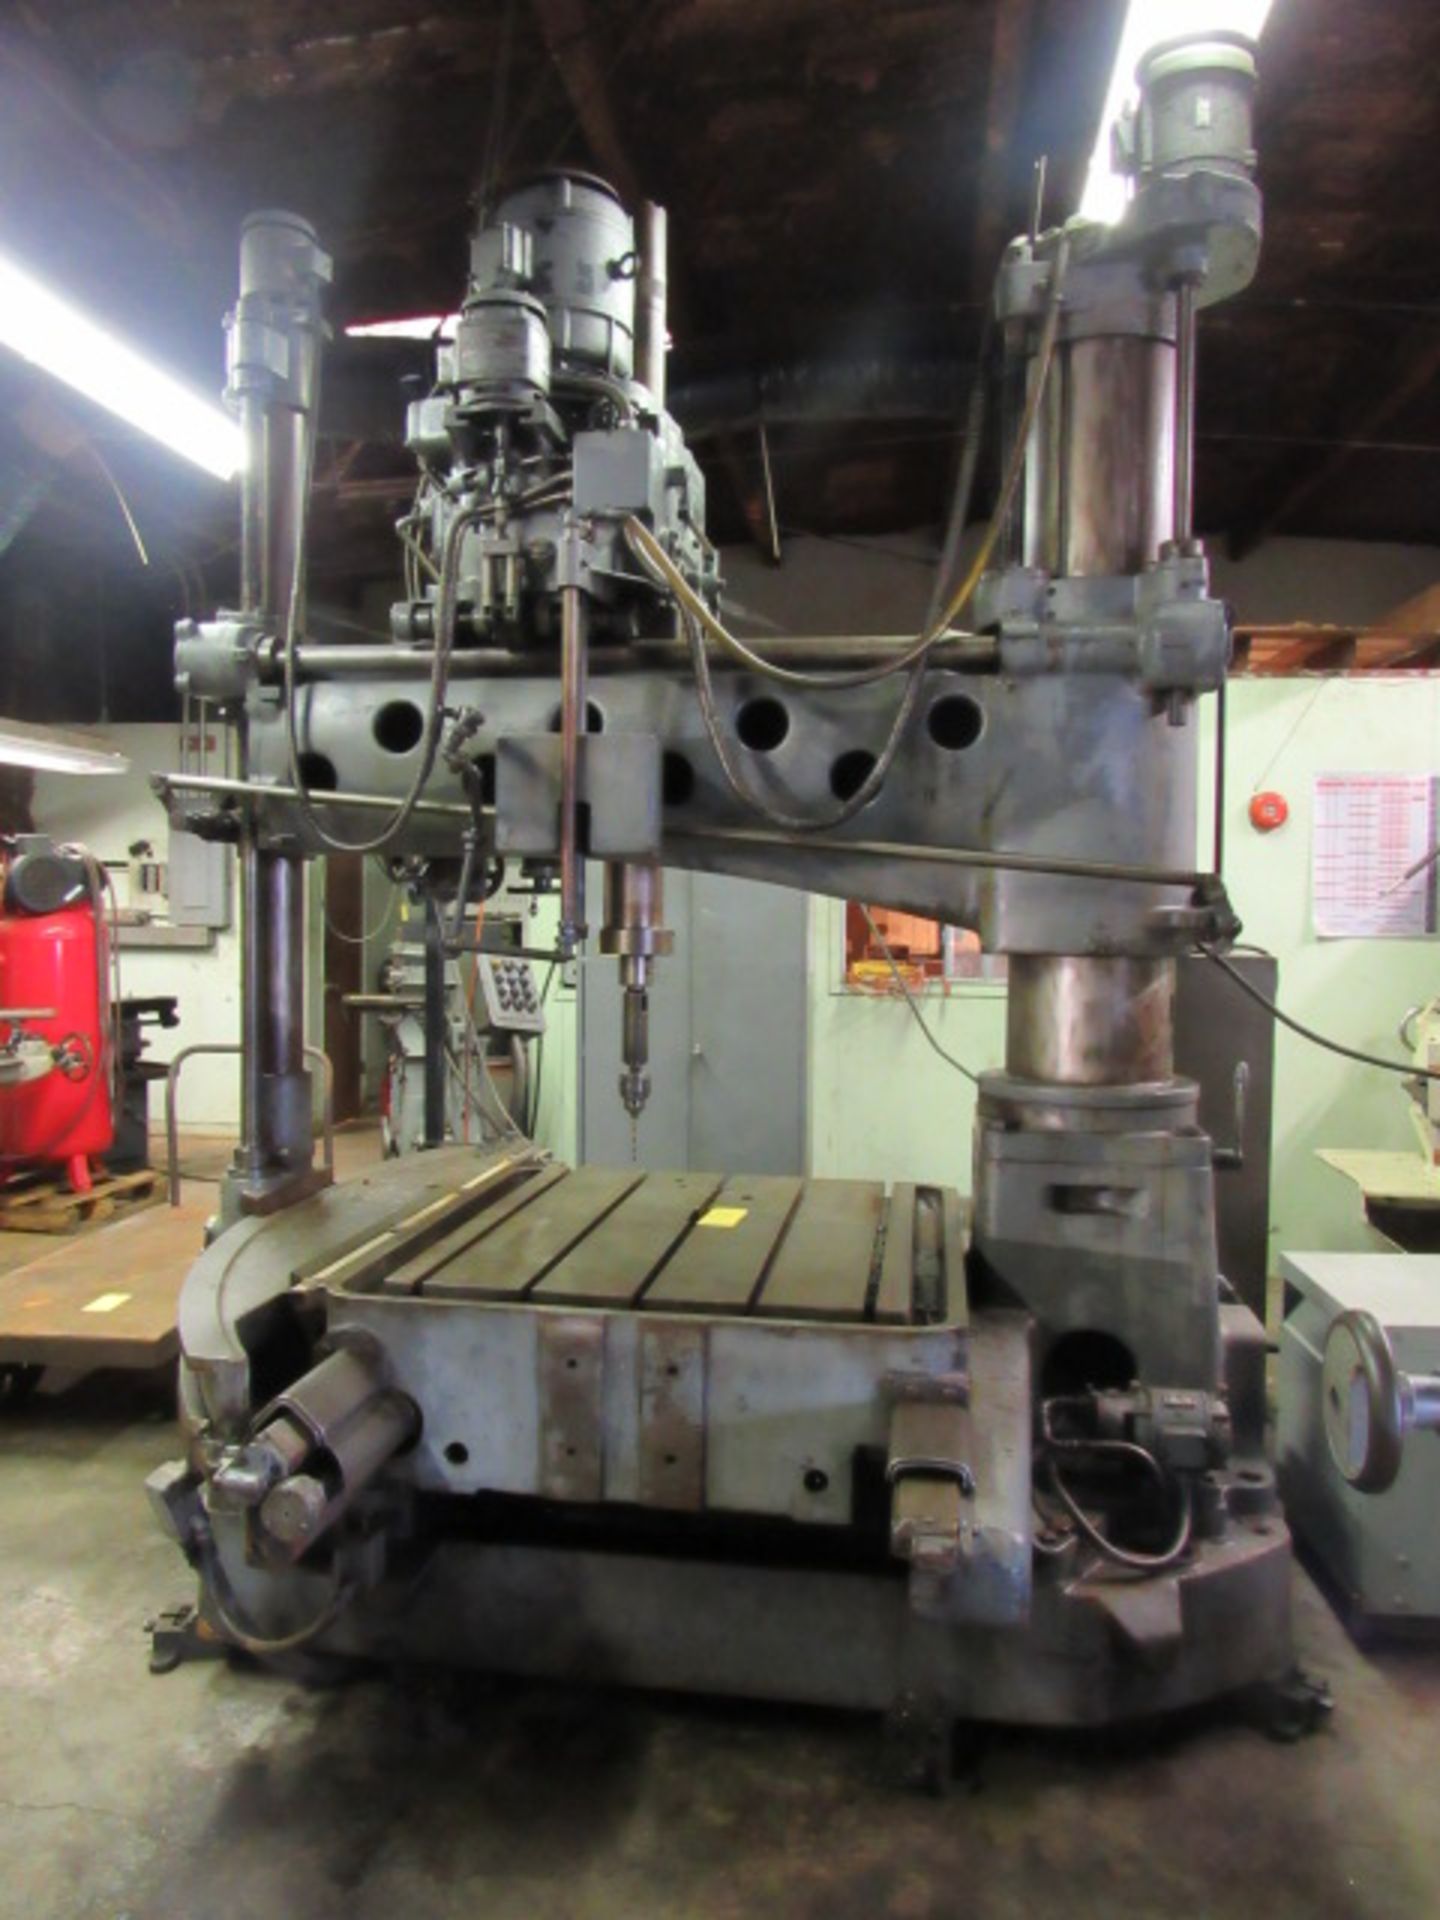 Oerlikon Model R-3 Combination Jig Boring and Radial Drilling Machine - Image 6 of 12